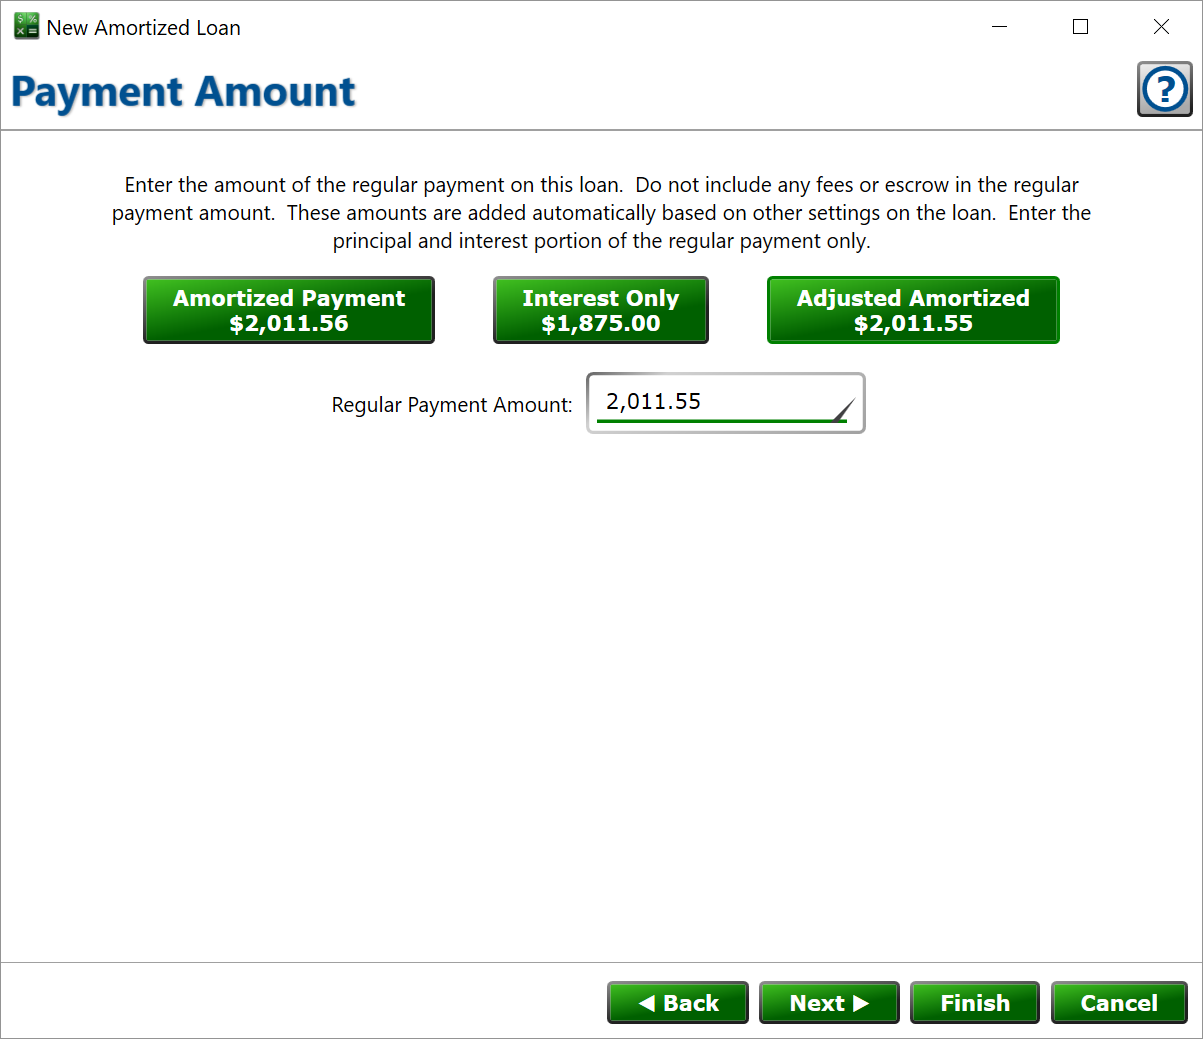 Image of Moneylender in the Amortized Loan Wizard with the payment amount set to an amortized payment over 360 months.